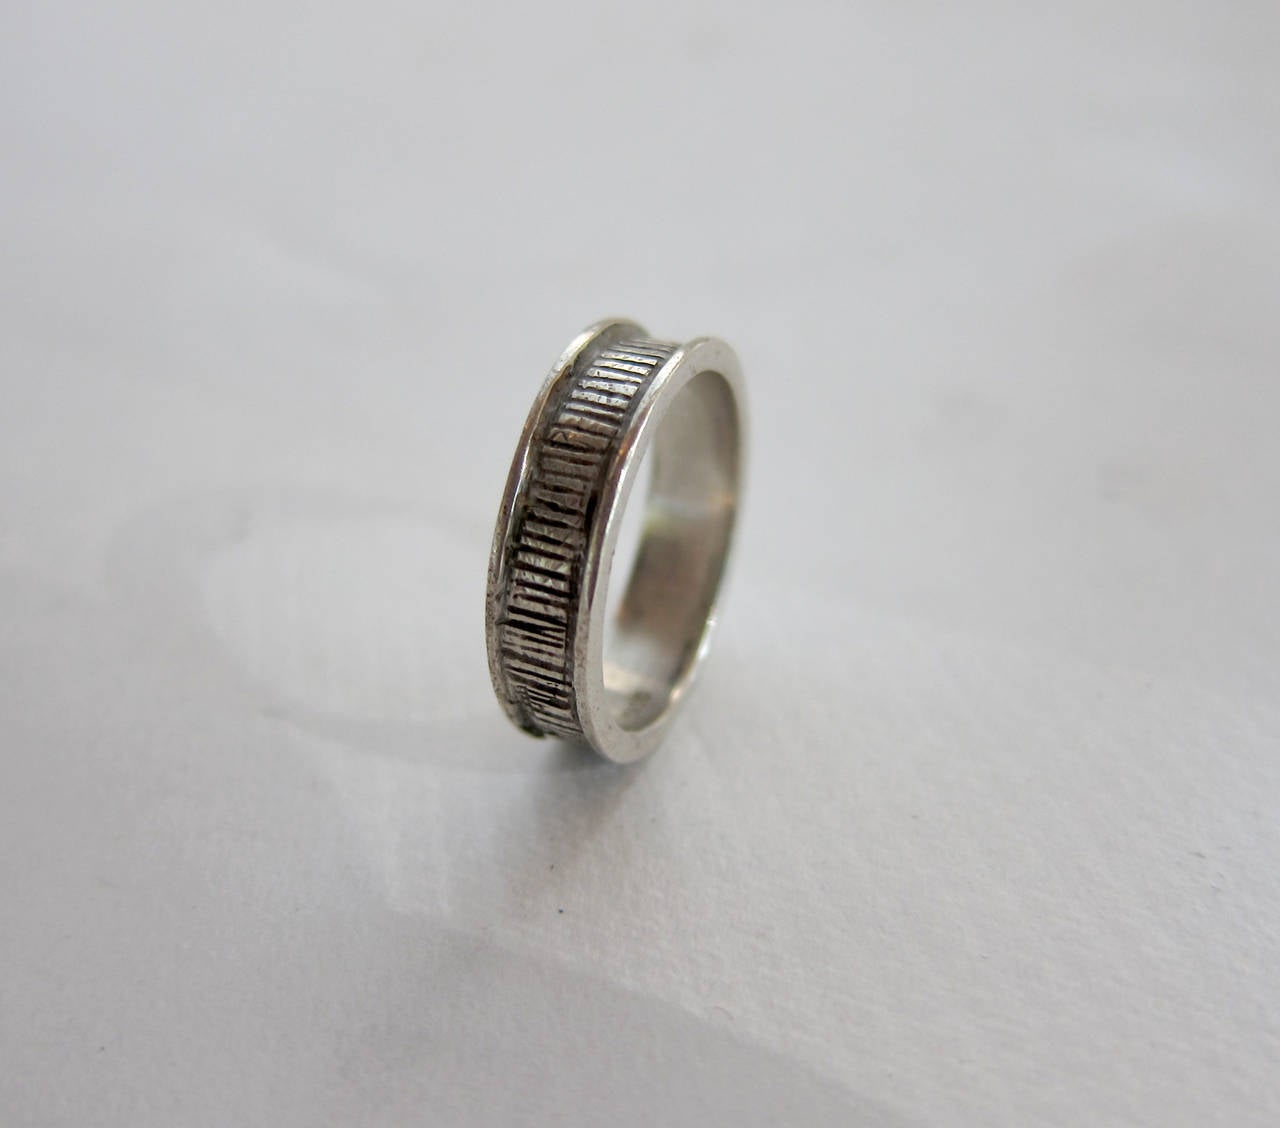 Sterling silver ring made by mid century modernist jeweler Peter Macchiarini of San Francisco, California.  Ring features a scribed design.  A finger size 6.75 and signed MACC, Sterling.  In very good vintage condition.